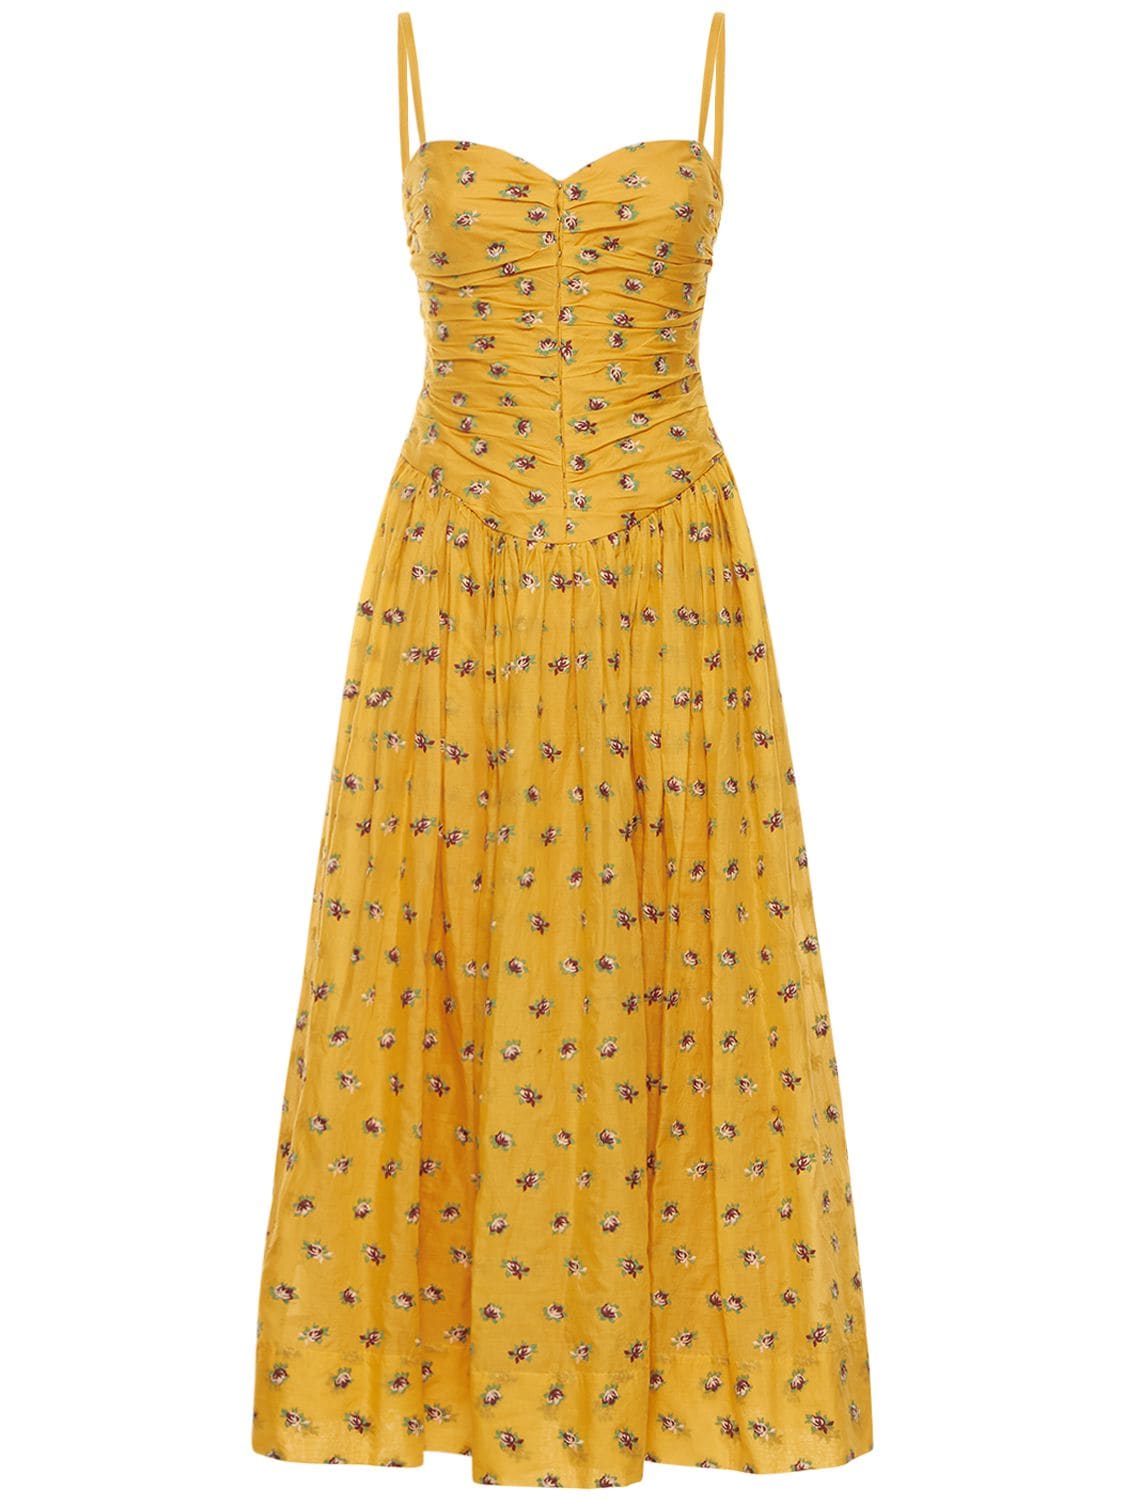 TORY BURCH Garden Rose Embroidered Midi Dress for Women